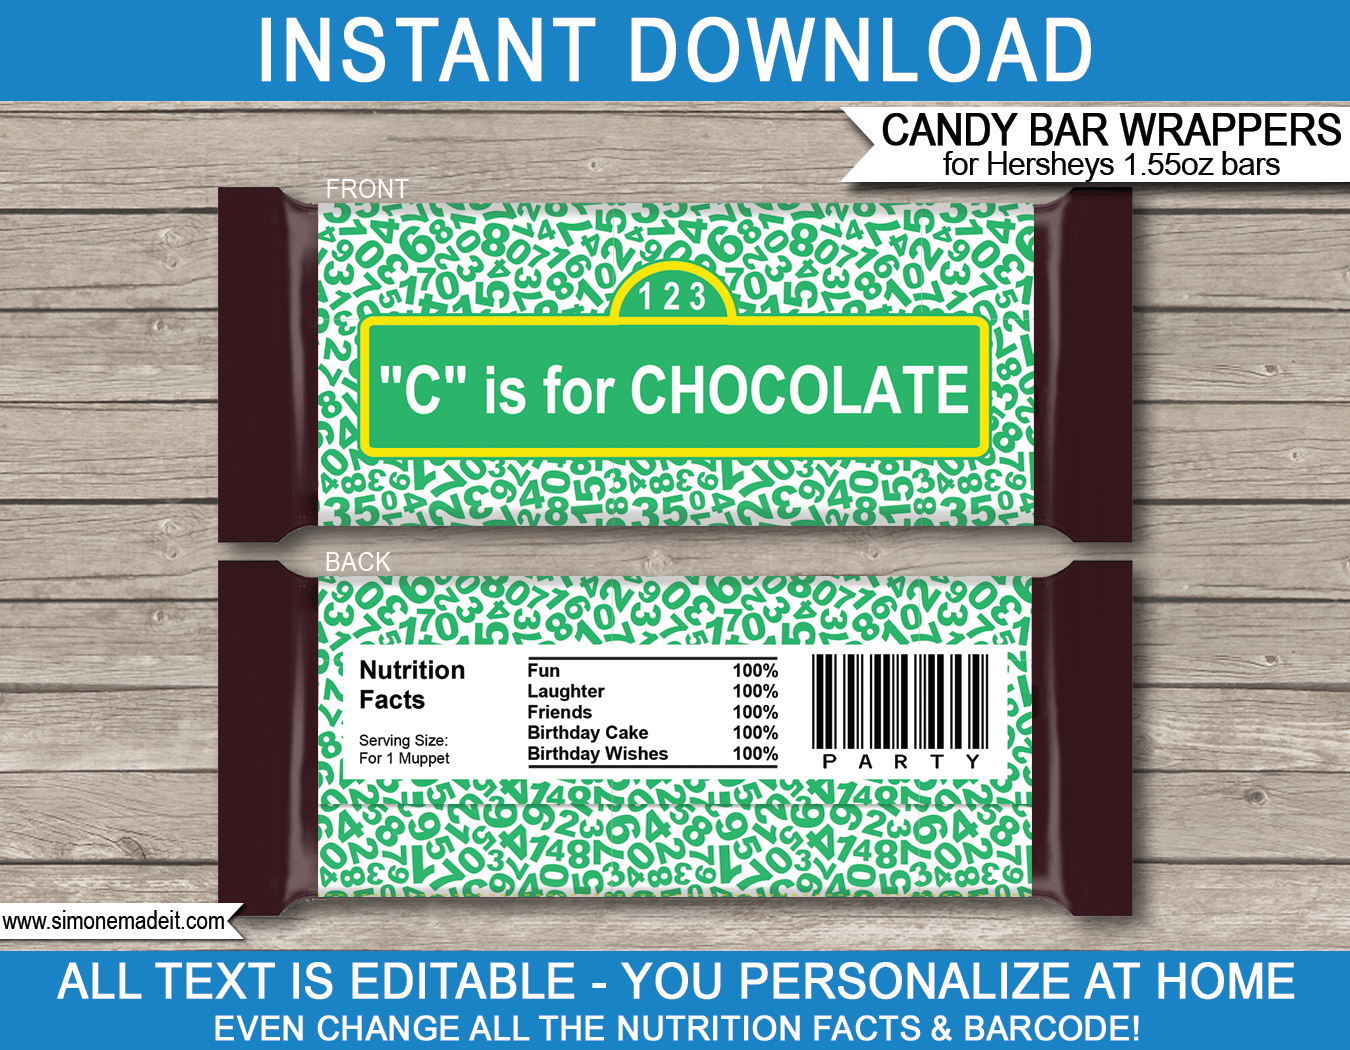 Sesame Street Hershey Candy Bar Wrappers | Birthday Party Favors | Personalized Candy Bars | Editable Template | INSTANT DOWNLOAD $3.00 via simonemadeit.com